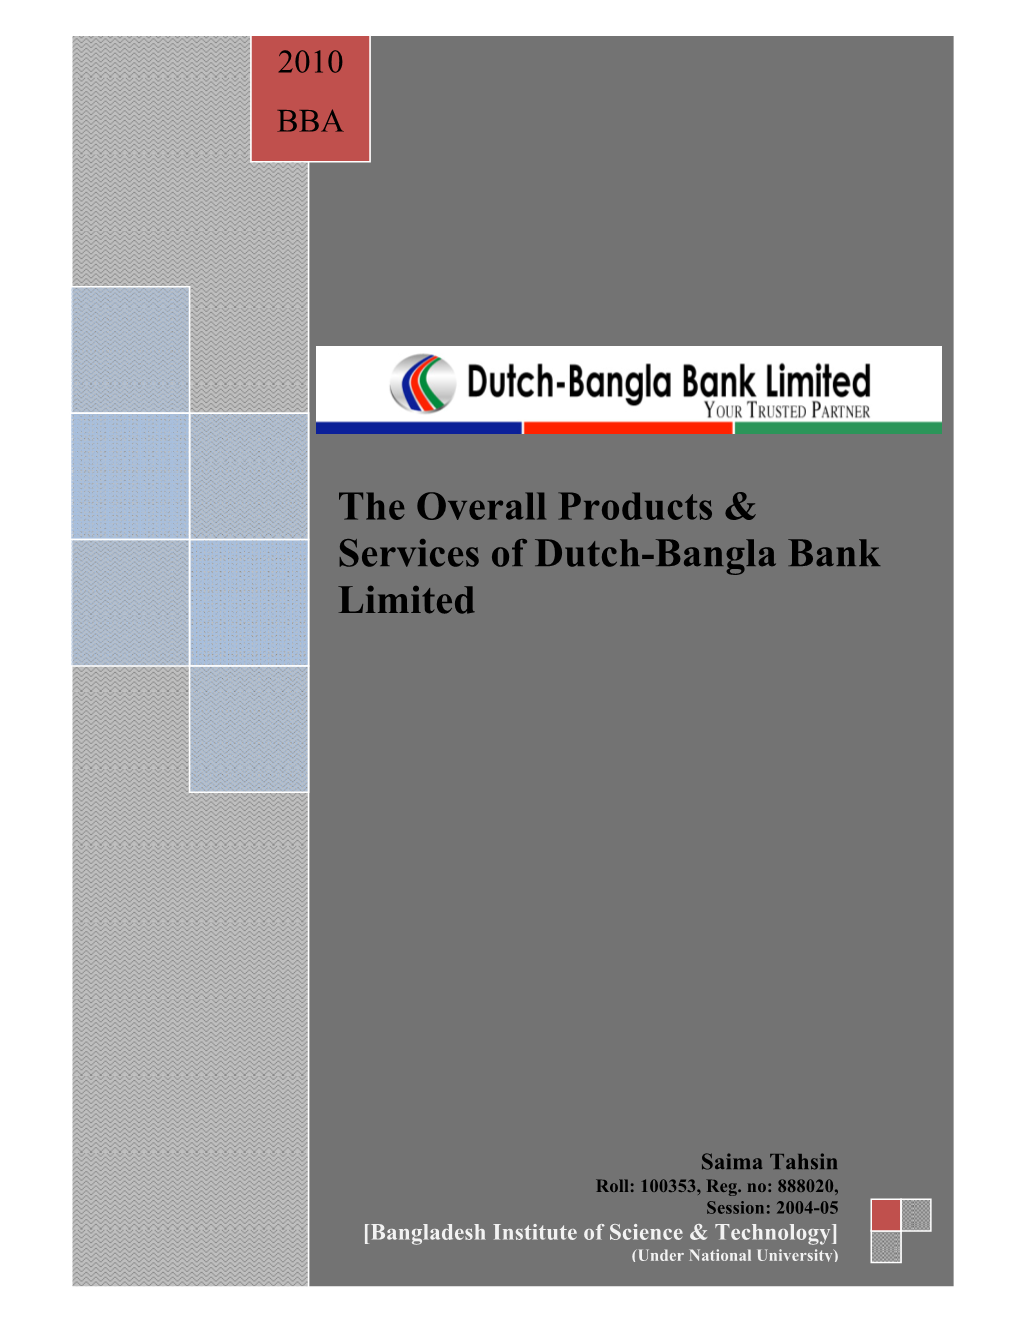 The Overall Products & Services of Dutch-Bangla Bank Limited